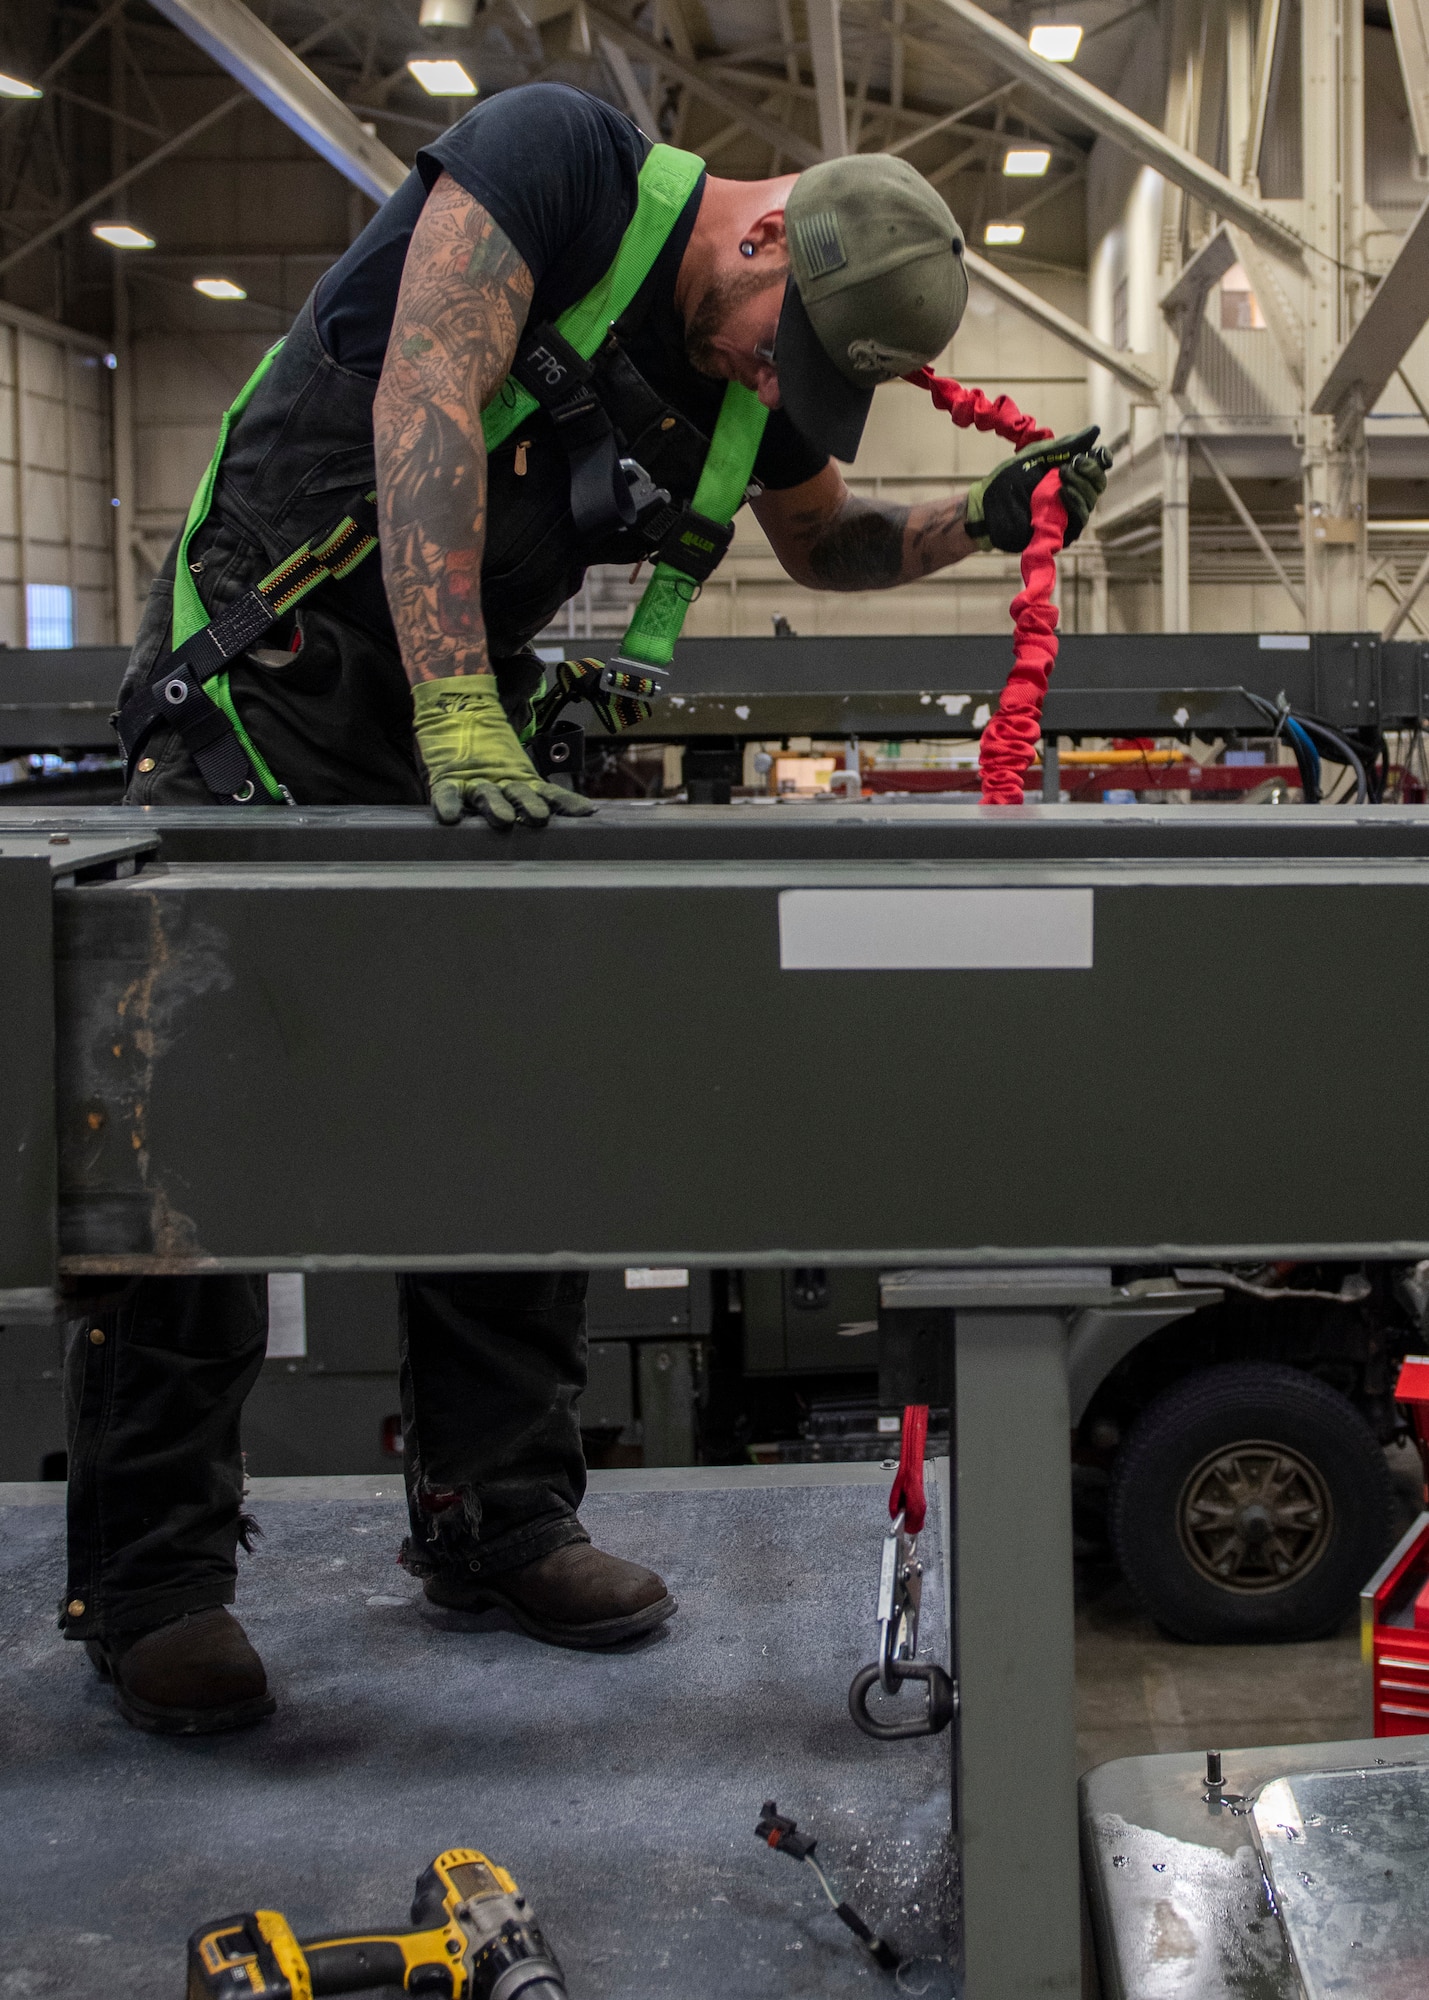 Jessie Mauldin, 673d Logistics Readiness Squadron heavy mobile equipment mechanic, evaluates the new connection between a fall-protection safety harness tether and a deicing truck at Joint Base Elmendorf-Richardson, Alaska, Jan. 22, 2019. The modification involves strategically attaching four eyelets to the top of each truck so mechanics can attach a mobile safety harness. Mauldin has taken steps to push his innovation to all heavy mobile equipment maintenance shops Air Force-wide.